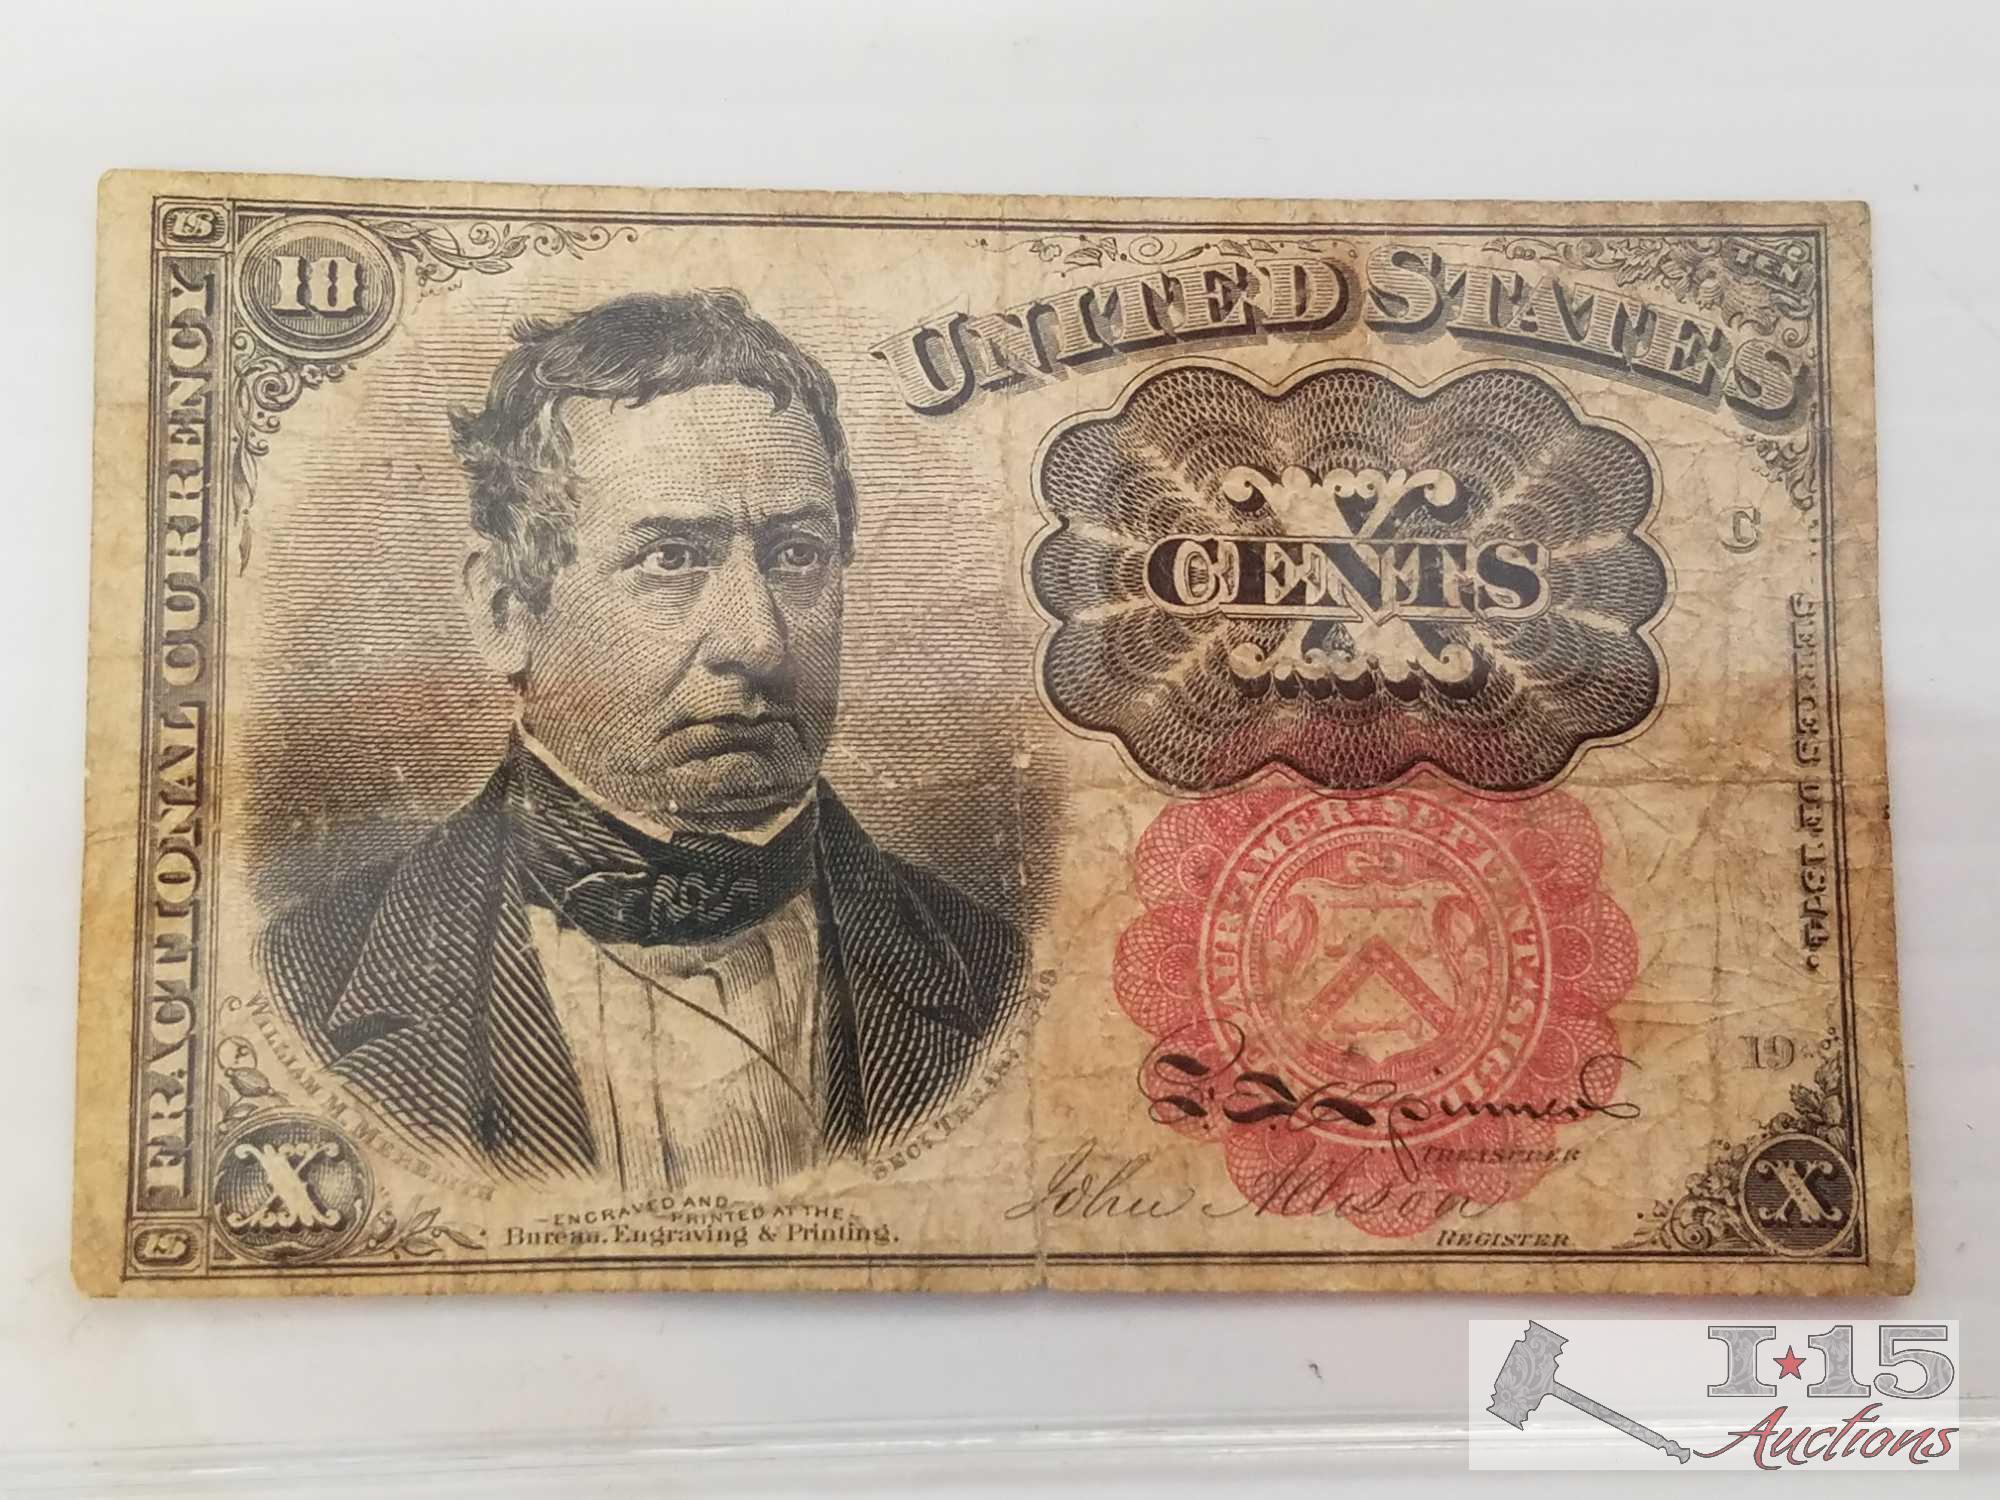 Old U. S. Paper Currency: 10, 25, 50 Cent fractional currency bill,